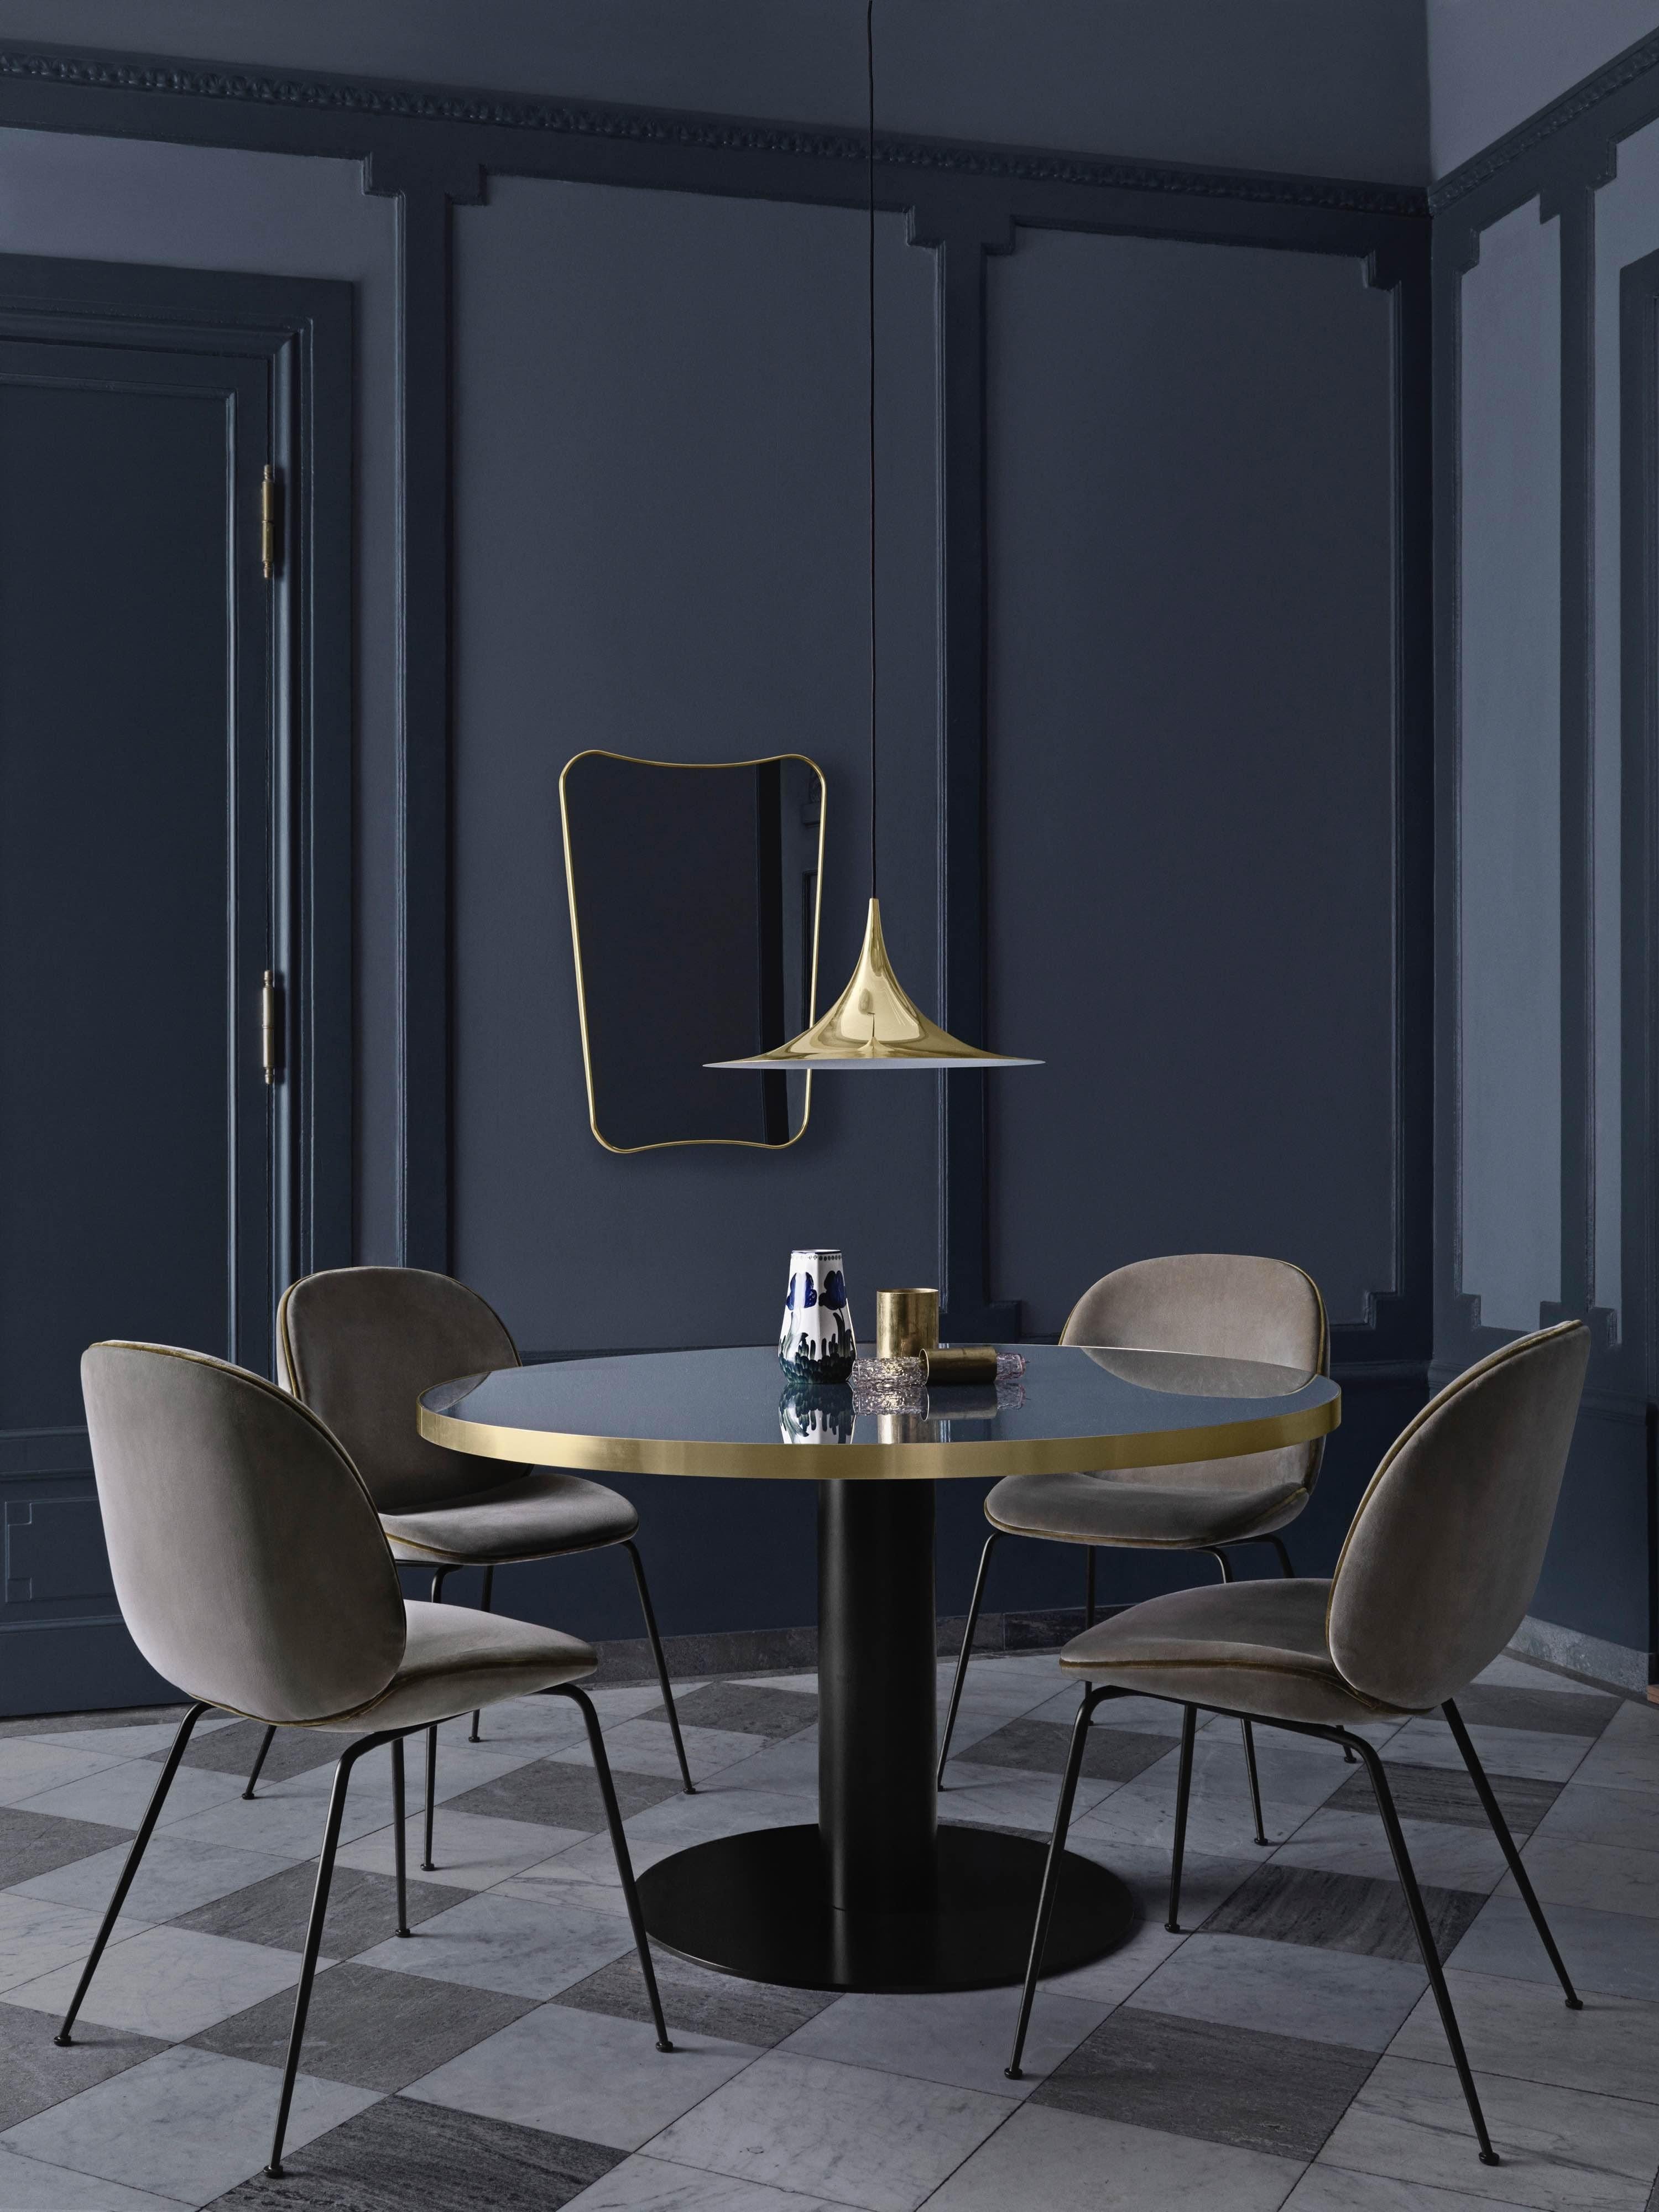 The F.A.33 mirror was originally designed by Italian designer Gio Ponti in 1933 for  FontanaArte, that period's most prominent lamp and glass manufacturer which Ponti and Pietro Chiesa founded a couple of years earlier.

With it's light curved shape